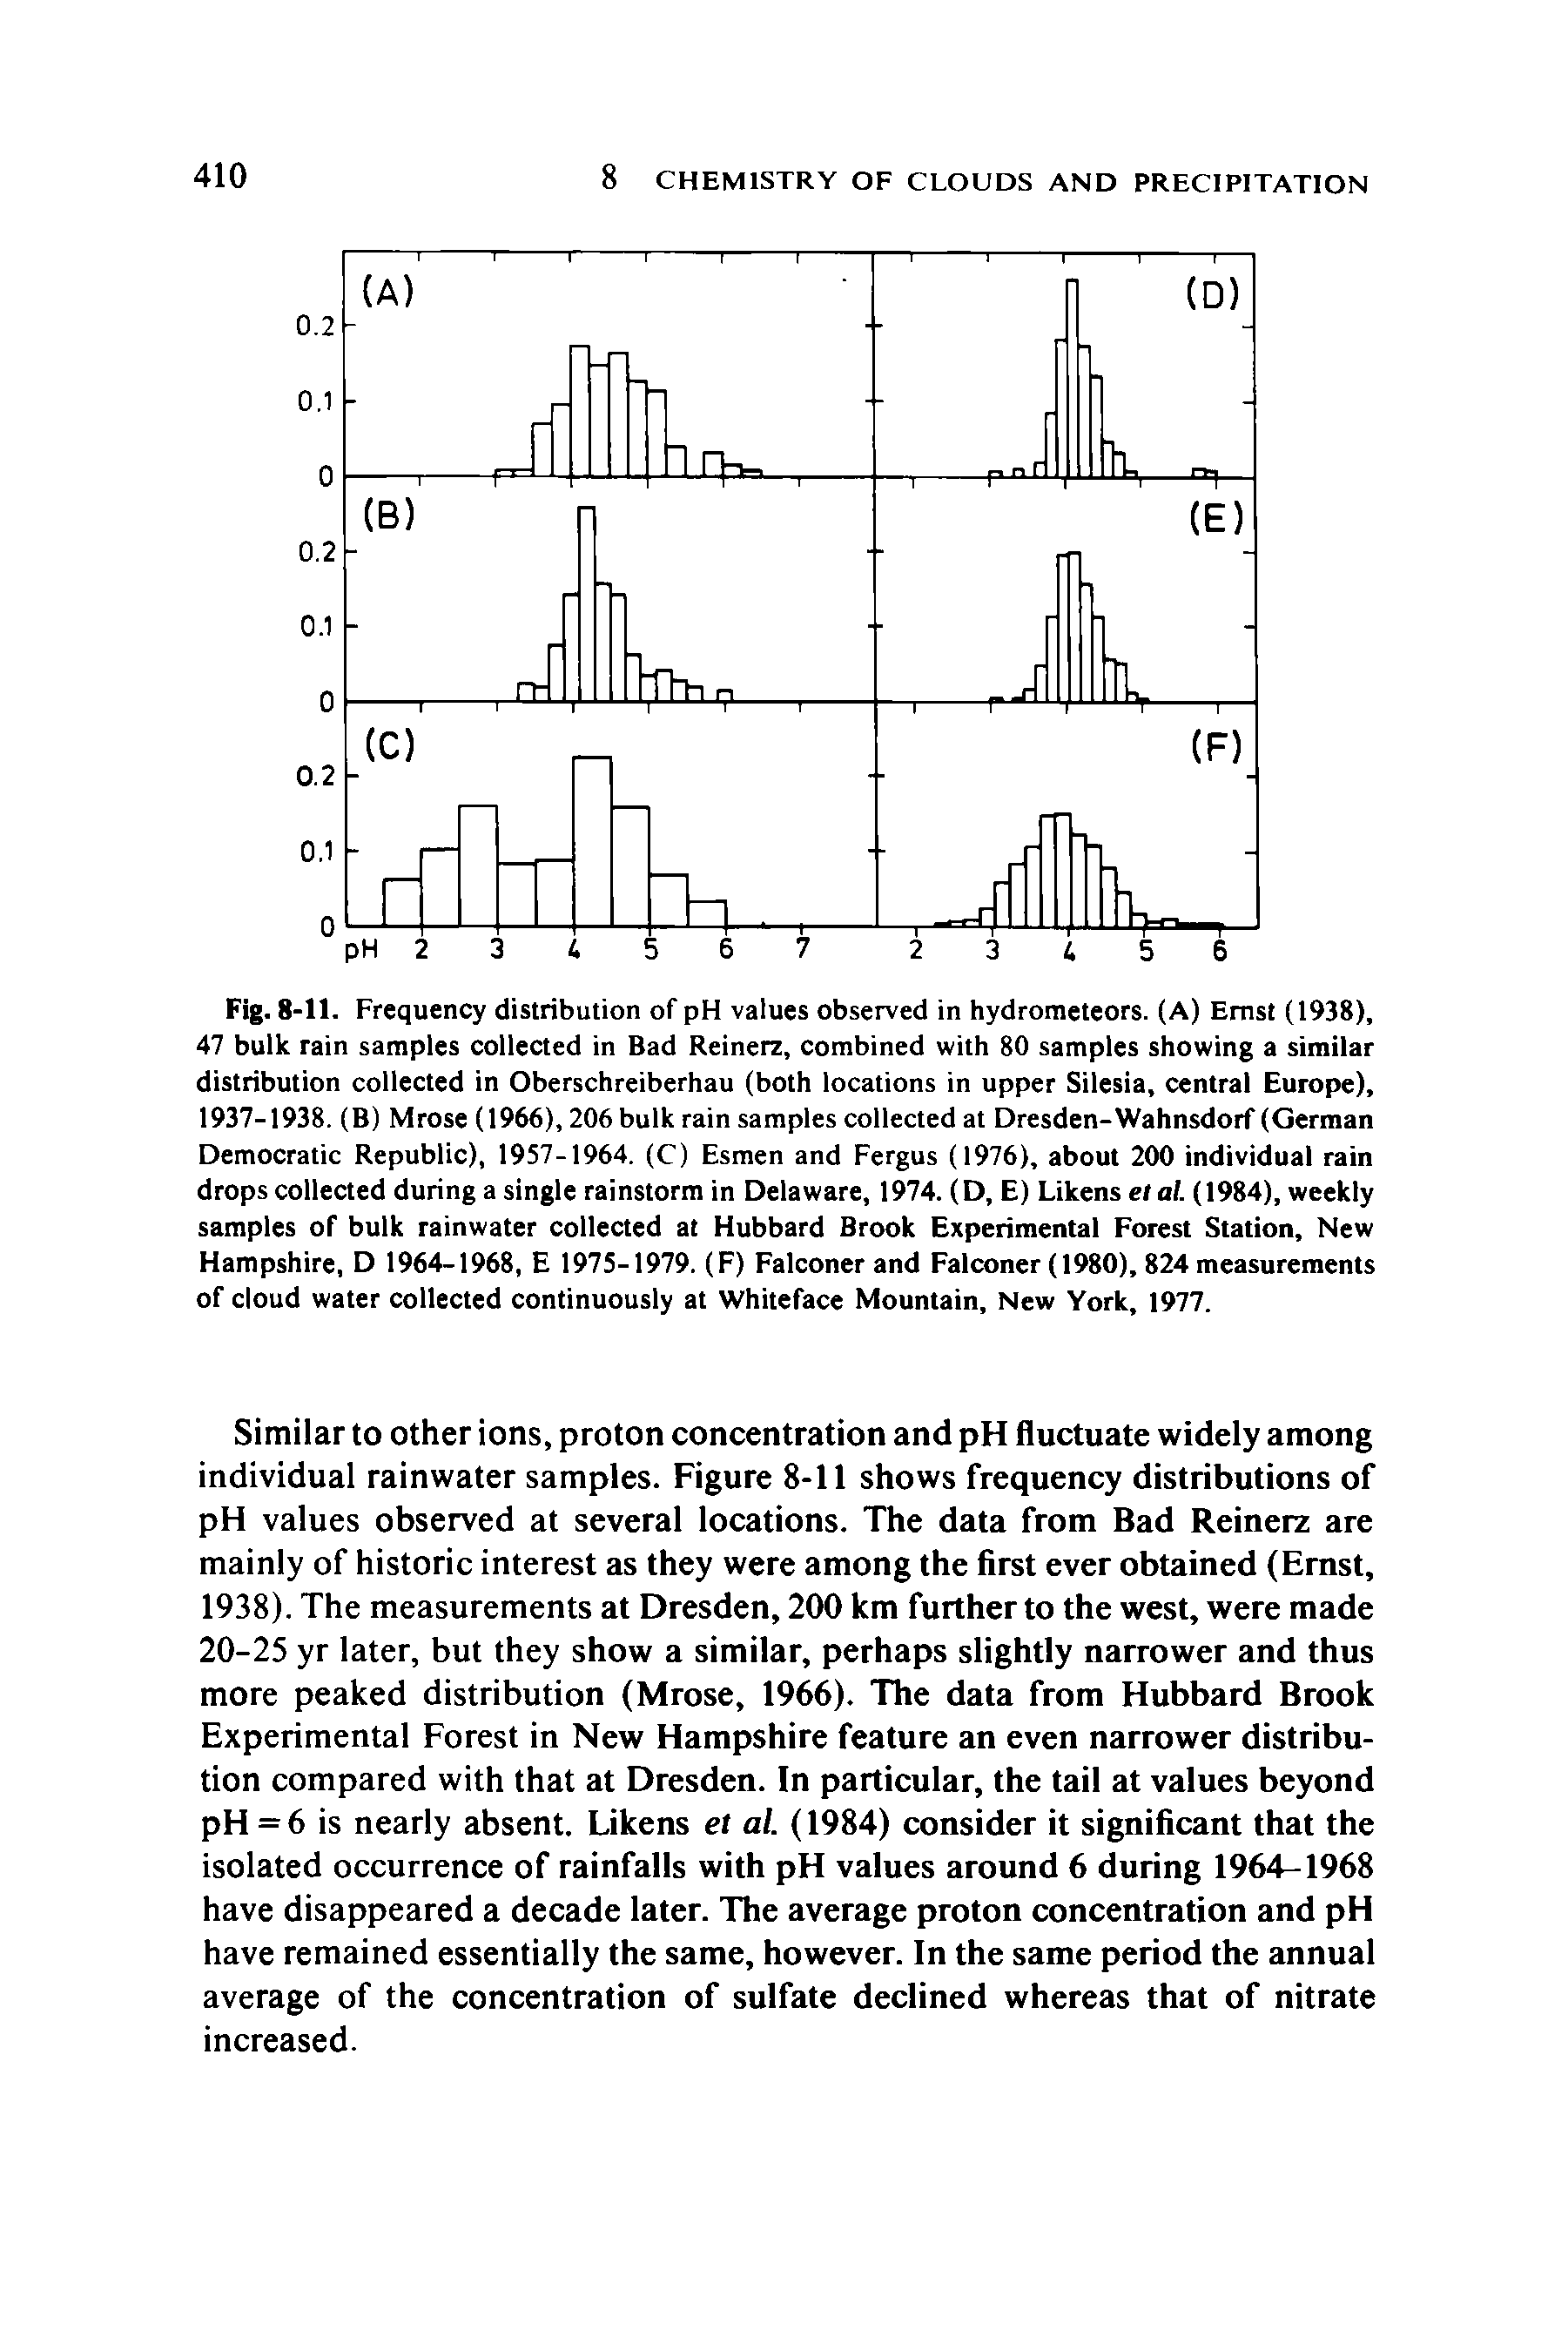 Fig. 8-11. Frequency distribution of pH values observed in hydrometeors. (A) Ernst (1938), 47 bulk rain samples collected in Bad Reinerz, combined with 80 samples showing a similar distribution collected in Oberschreiberhau (both locations in upper Silesia, central Europe), 1937-1938. (B) Mrose (1966), 206 bulk rain samples collected at Dresden-Wahnsdorf (German Democratic Republic), 1957-1964. (C) Esmen and Fergus (1976), about 200 individual rain drops collected during a single rainstorm in Delaware, 1974. (D, E) Likens etal. (1984), weekly samples of bulk rainwater collected at Hubbard Brook Experimental Forest Station, New Hampshire, D 1964-1968, E 1975-1979. (F) Falconer and Falconer (1980), 824 measurements of cloud water collected continuously at Whiteface Mountain, New York, 1977.